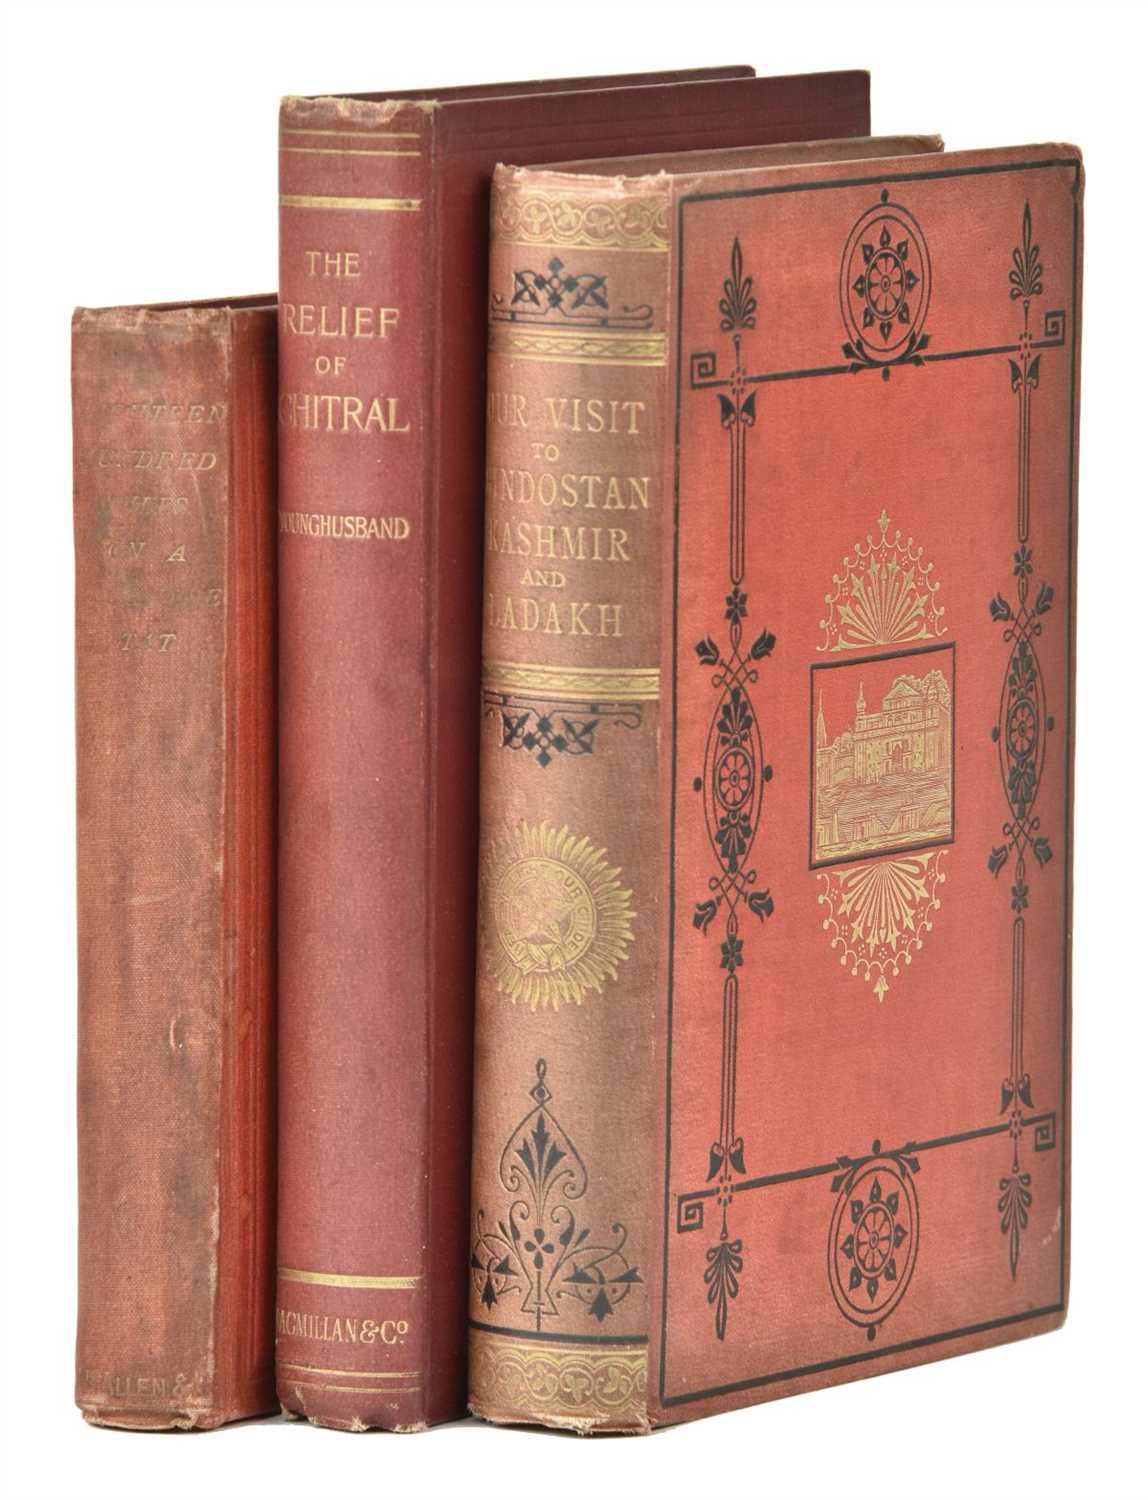 Lot 3 - Aynsley (Harriet Georgiana). Our Visit to Hindostan, Kashmir, and Ladakh, 1st edition, 1879